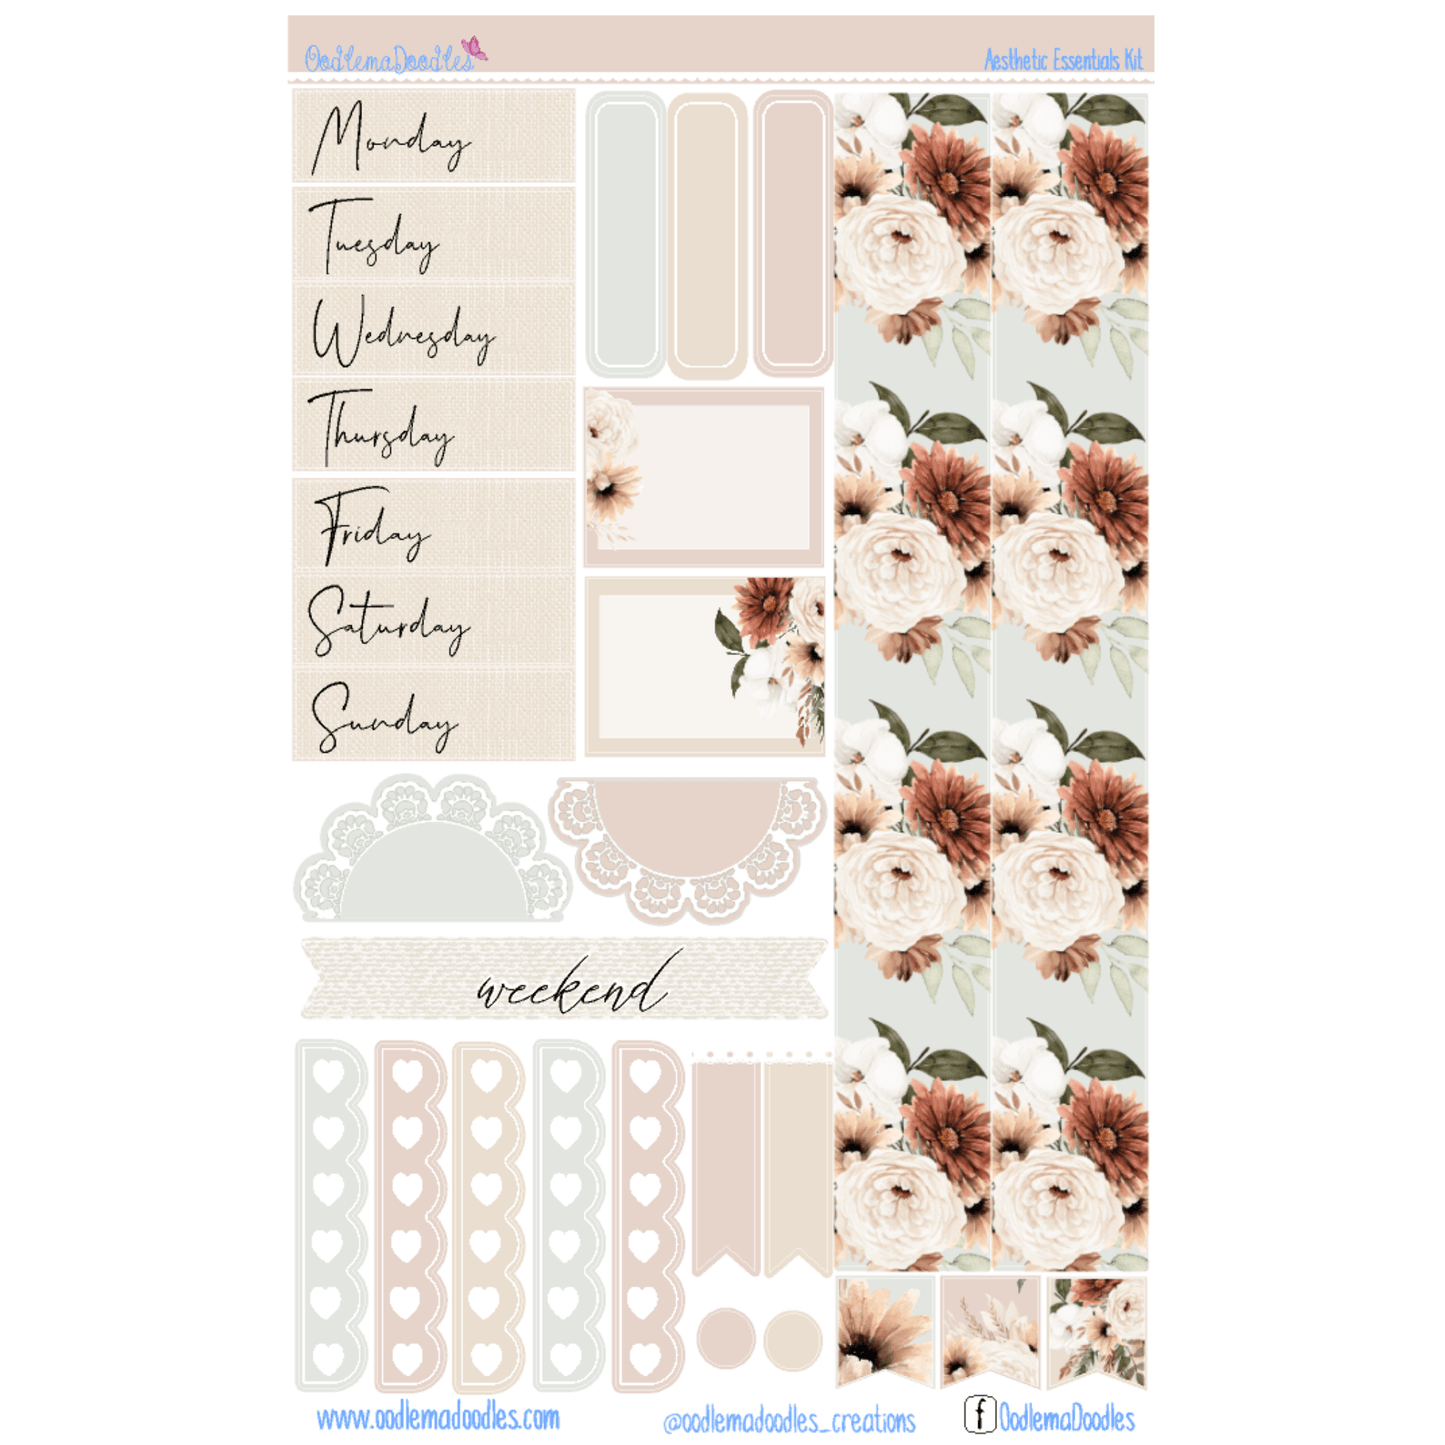 Aesthetic Essential Planner Sticker Kit - oodlemadoodles